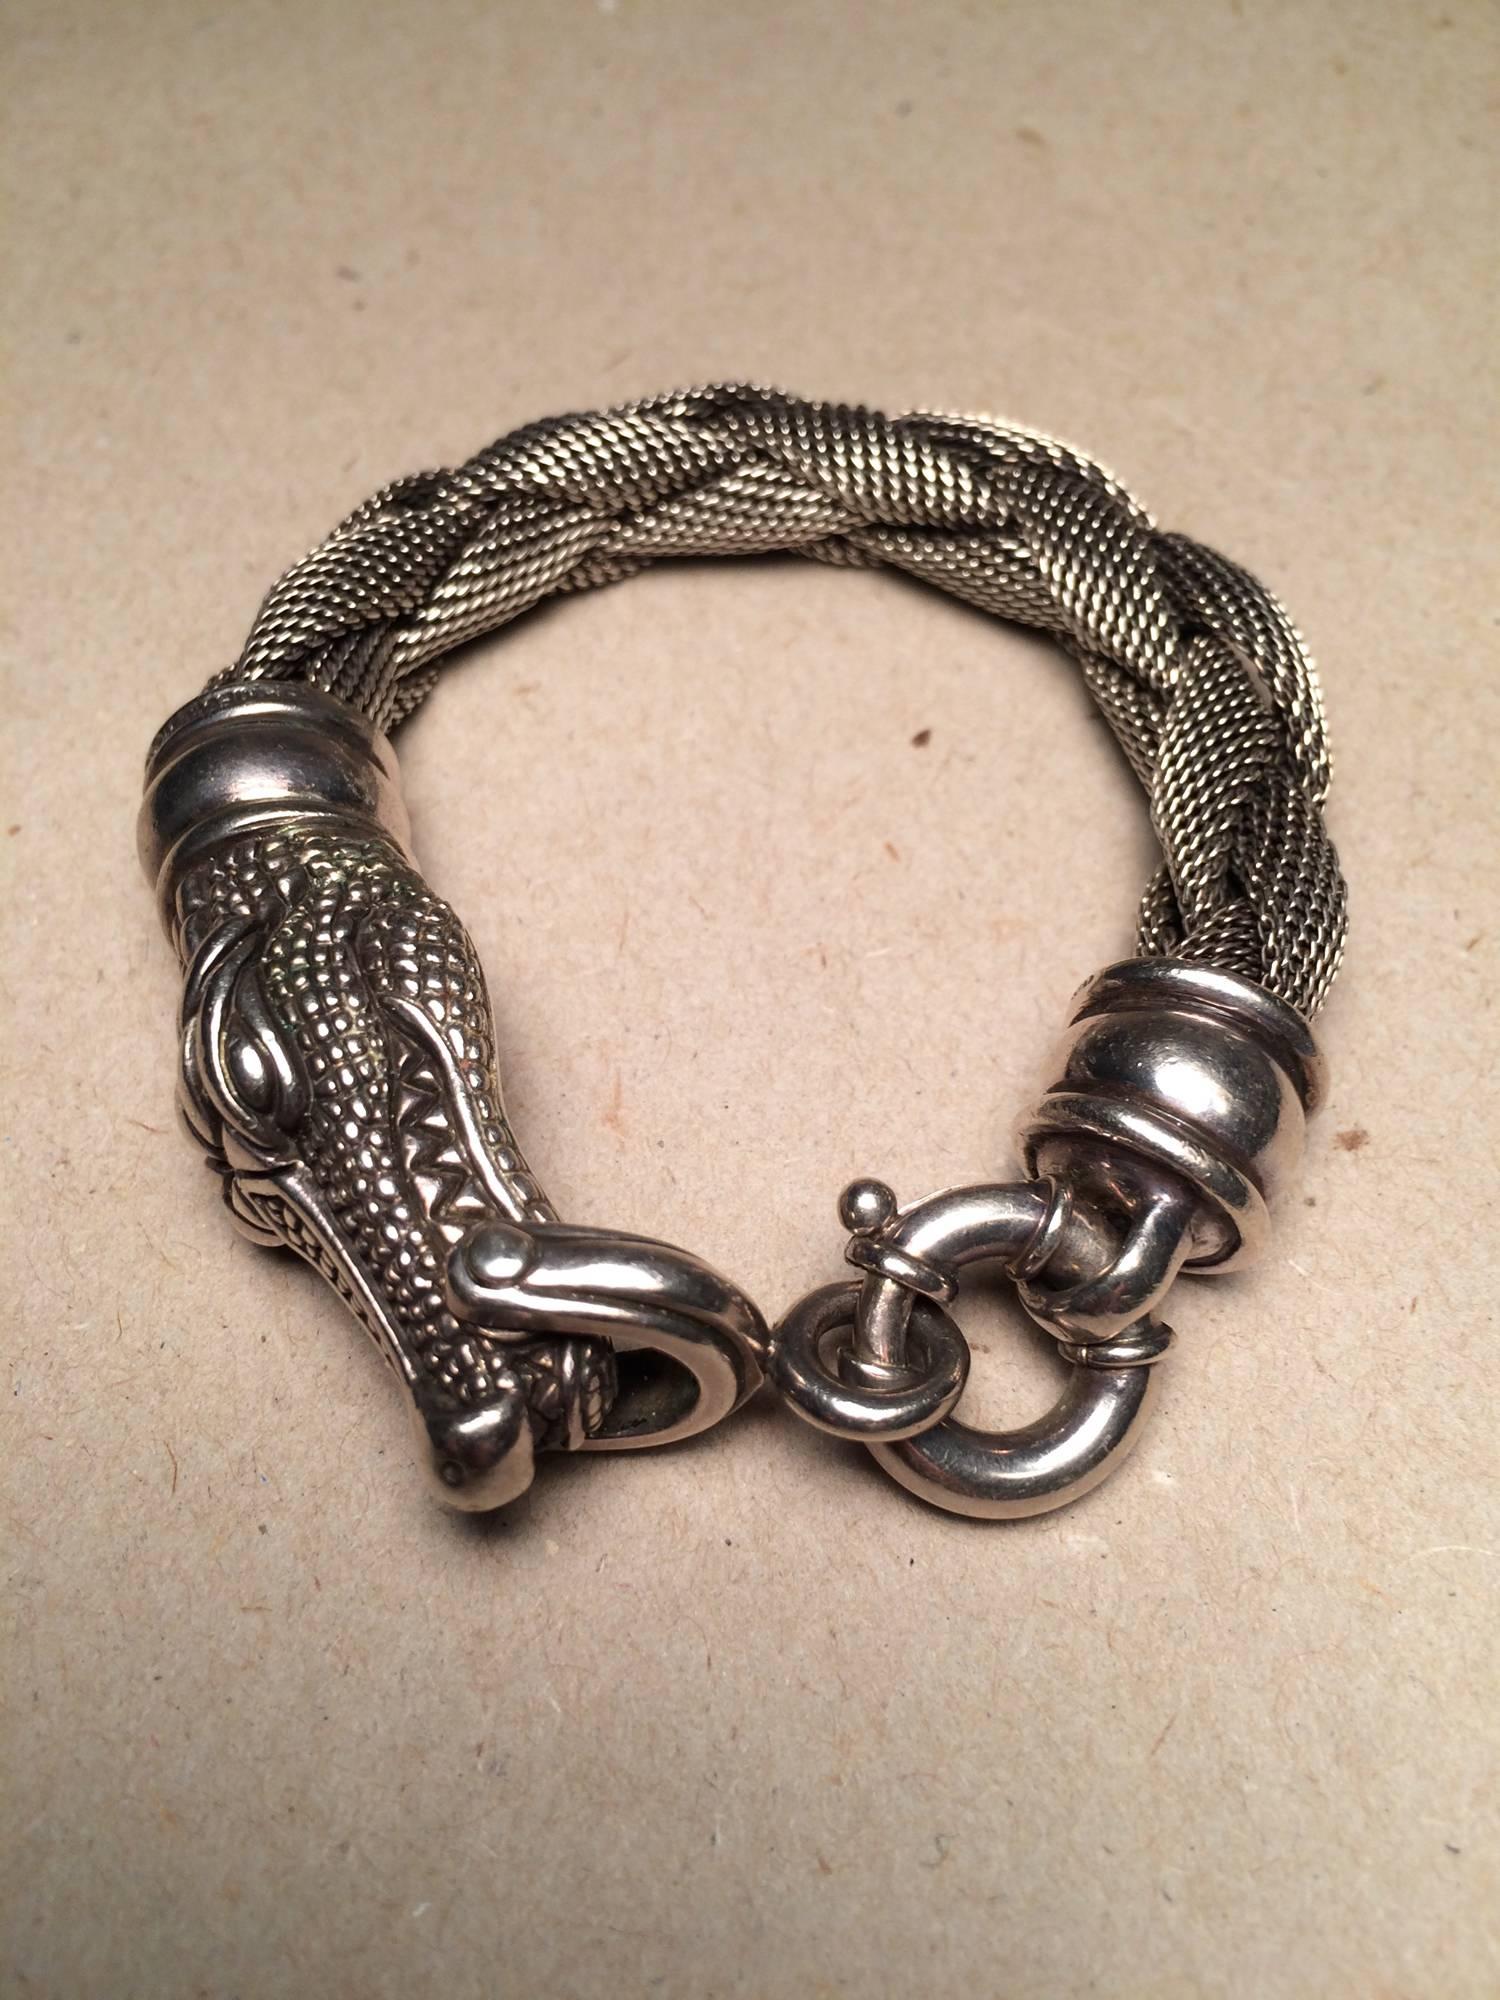 Vintage Kieselstein Cord sterling silver mesh alligator bracelet 1988...Highly detailed alligator head with a body of sterling mesh, closes with a spring hook...All with a chunky look...Approx. 7